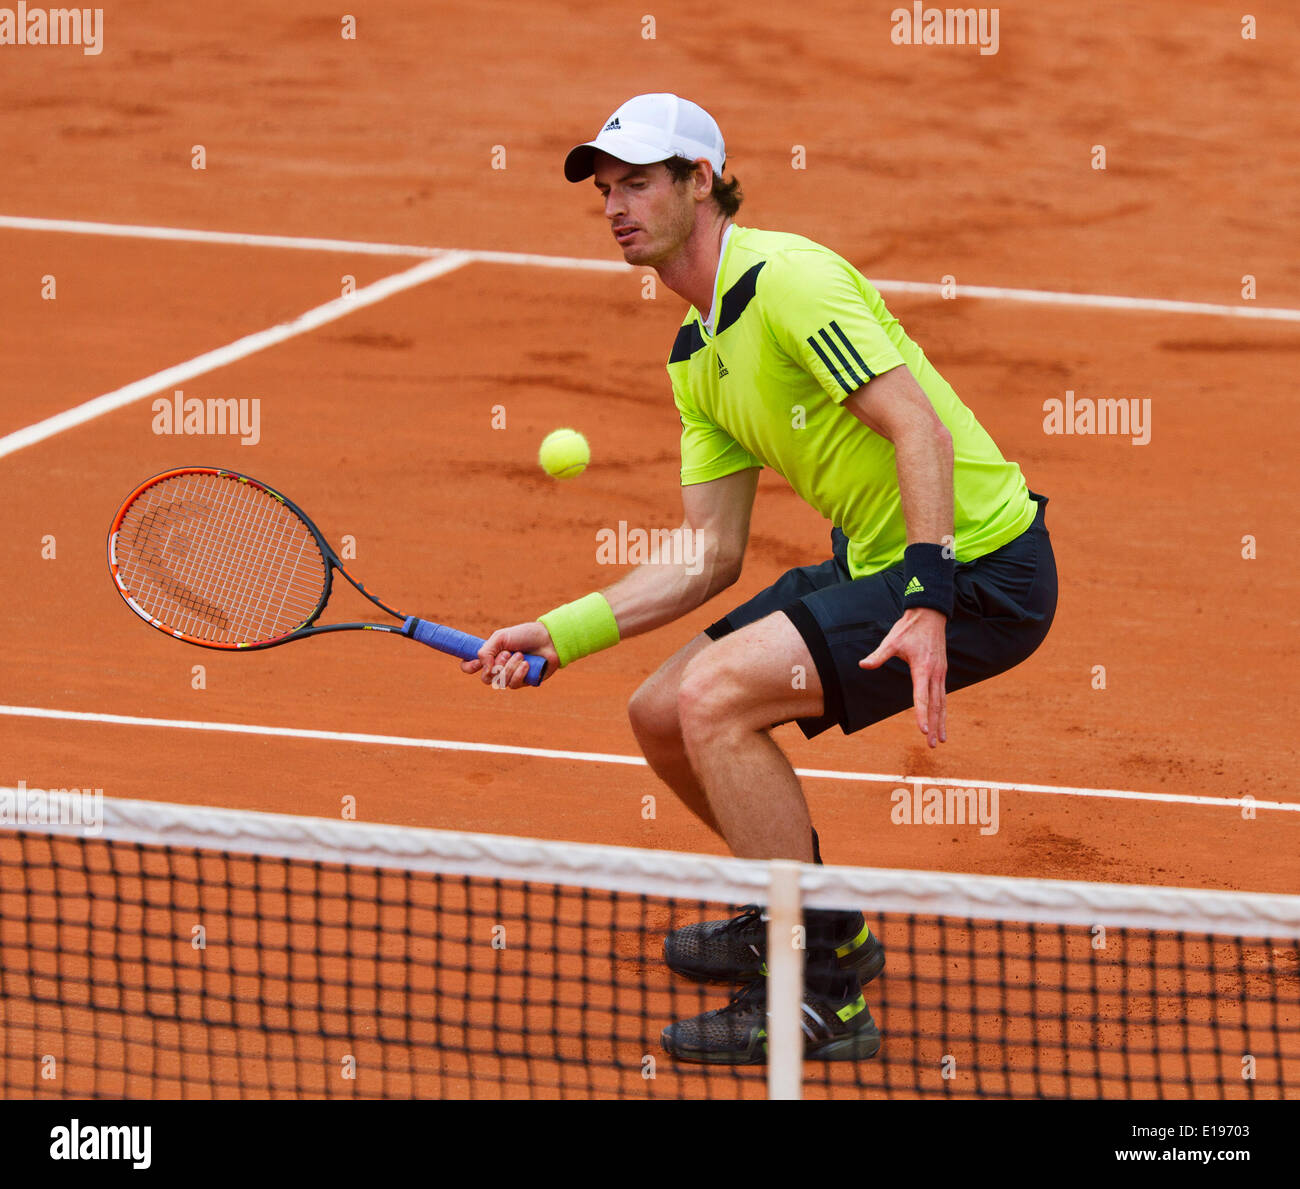 Paris, France. 27th May 2014. Tennis, French Open, Roland Garros, Andy Murray (GBR) in his match against Andrey Golubev (KAZ) Photo:Tennisimages/Henk Koster/Alamy Live News Stock Photo